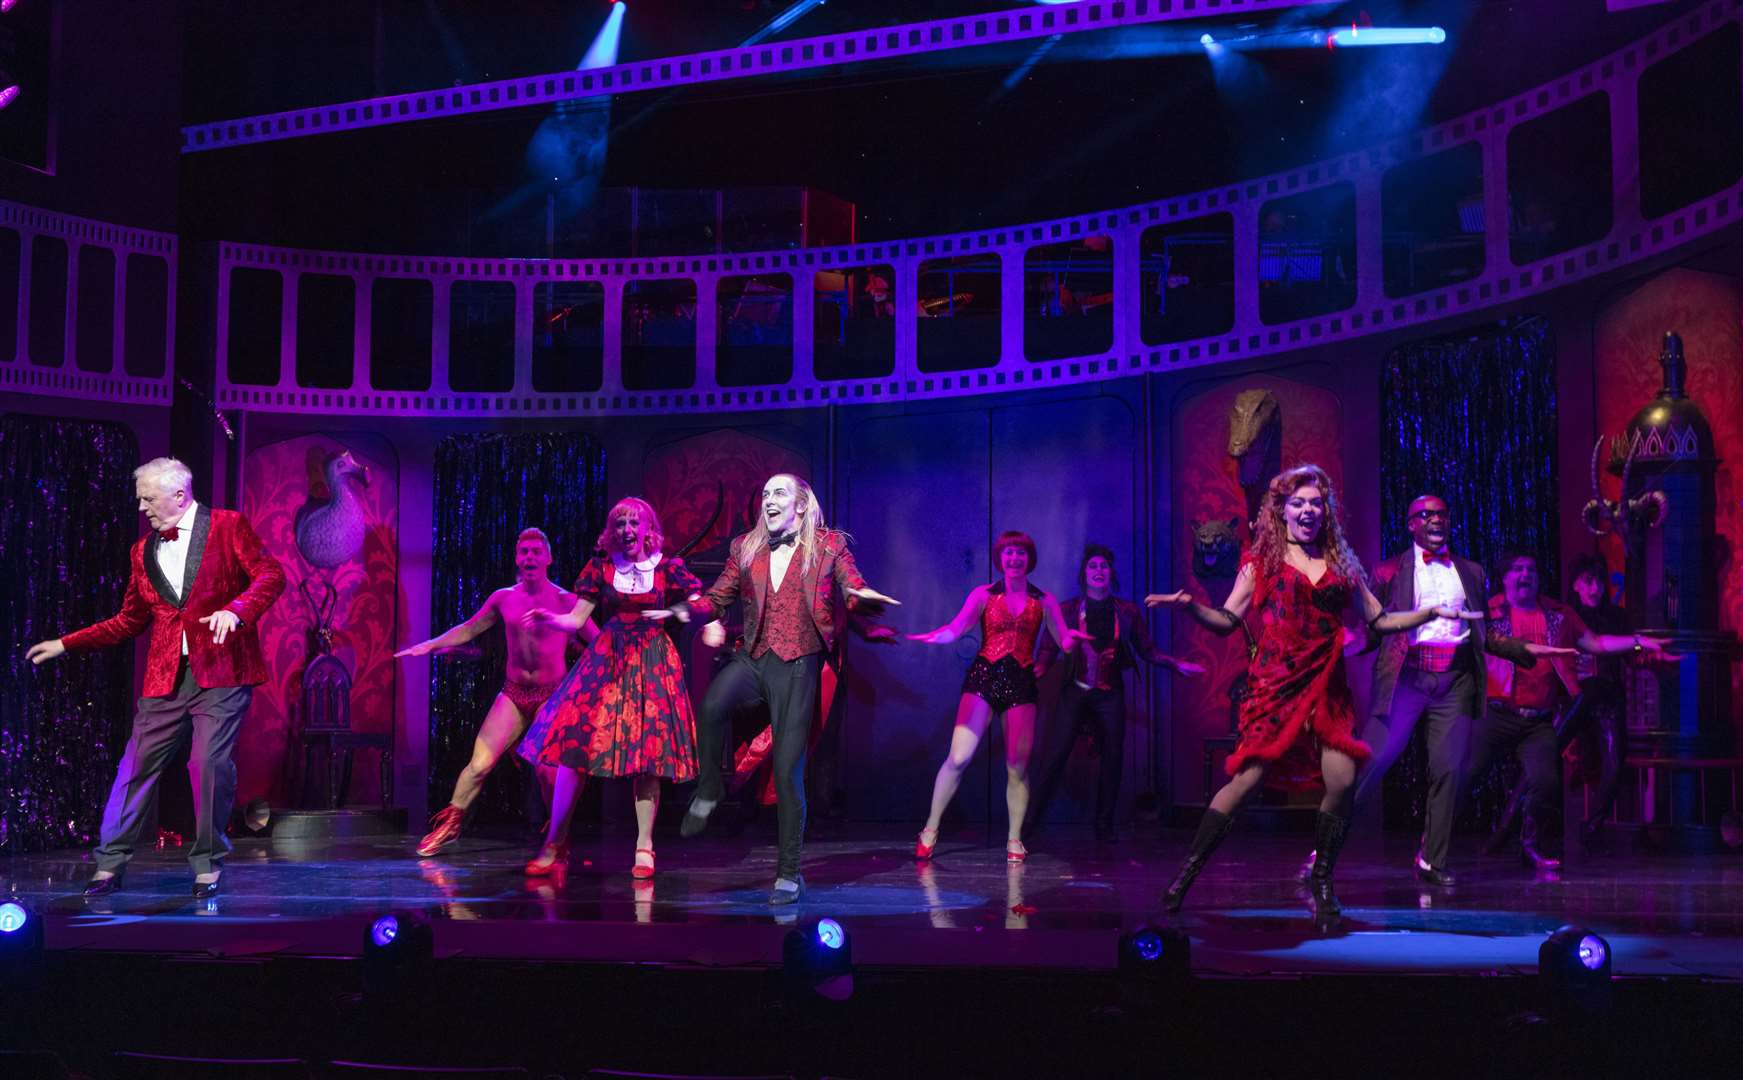 A scene from this Rocky Horror Show production. Picture: David Freeman